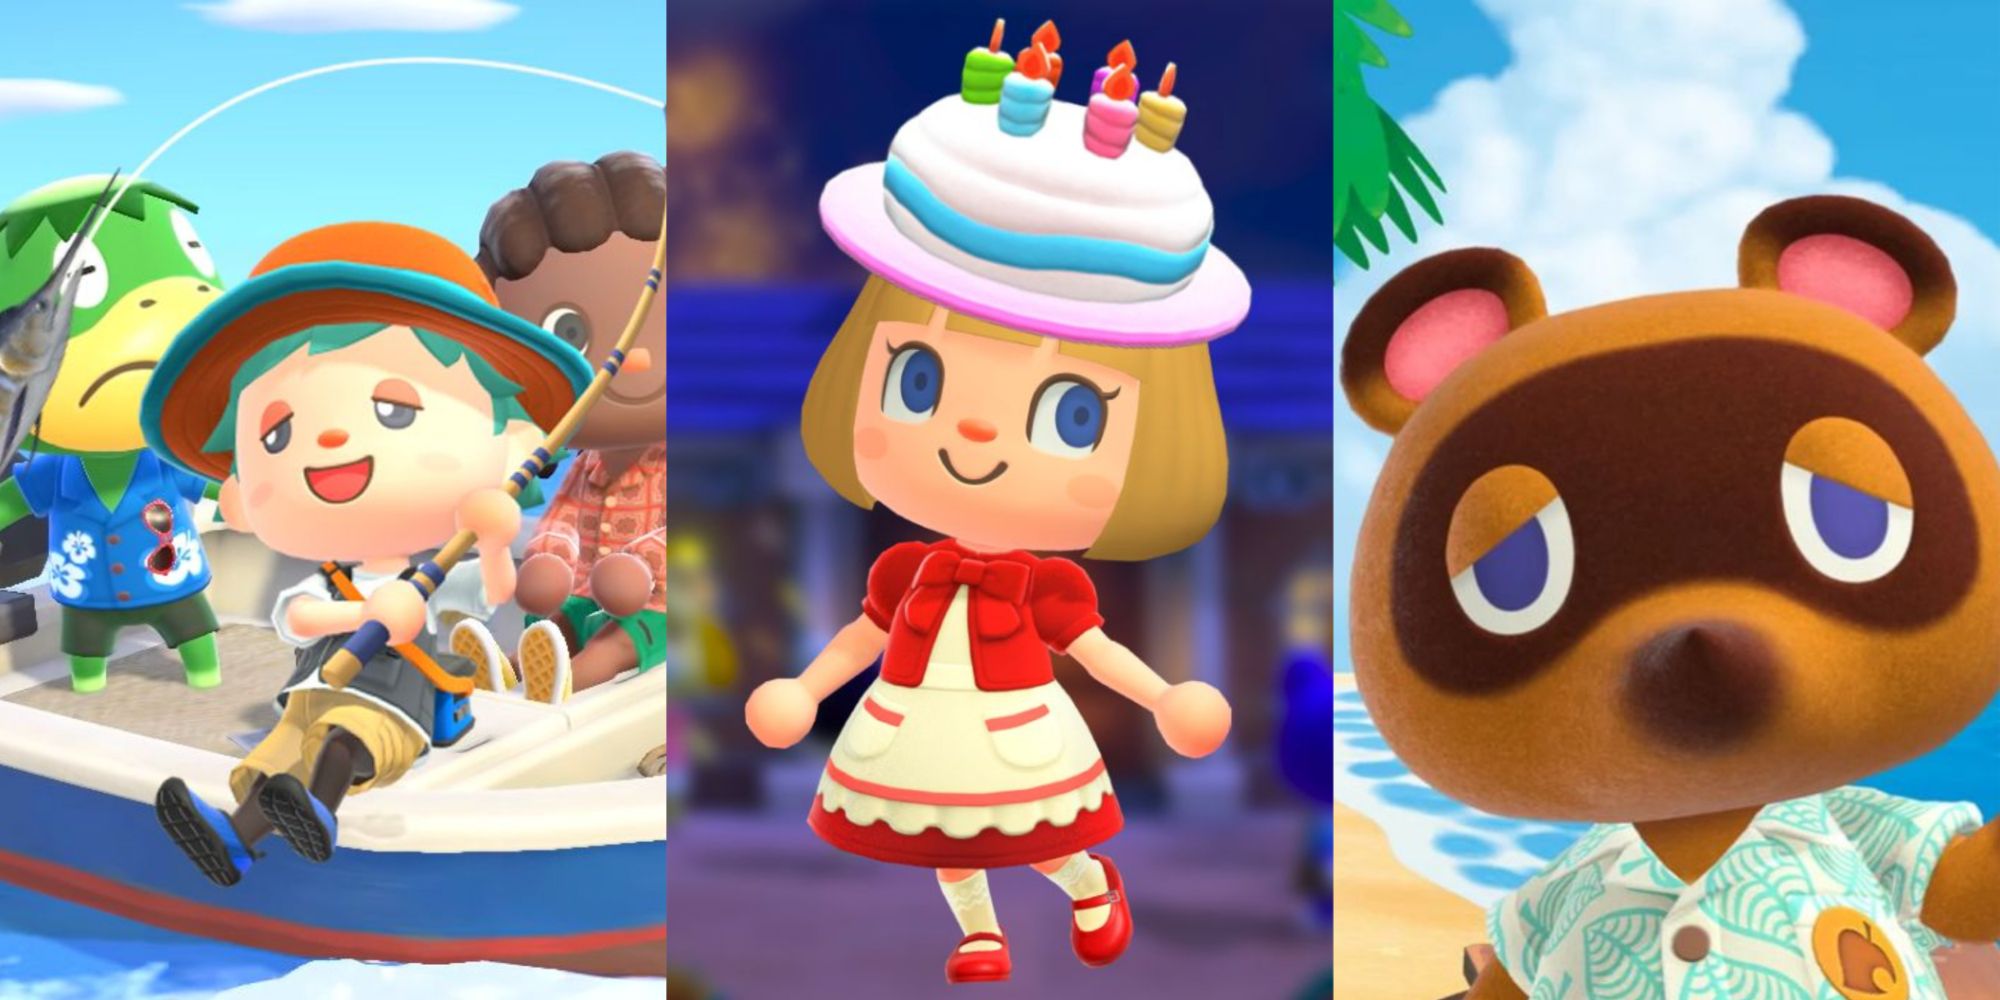 A split image of Animal Crossing New Horizons characters